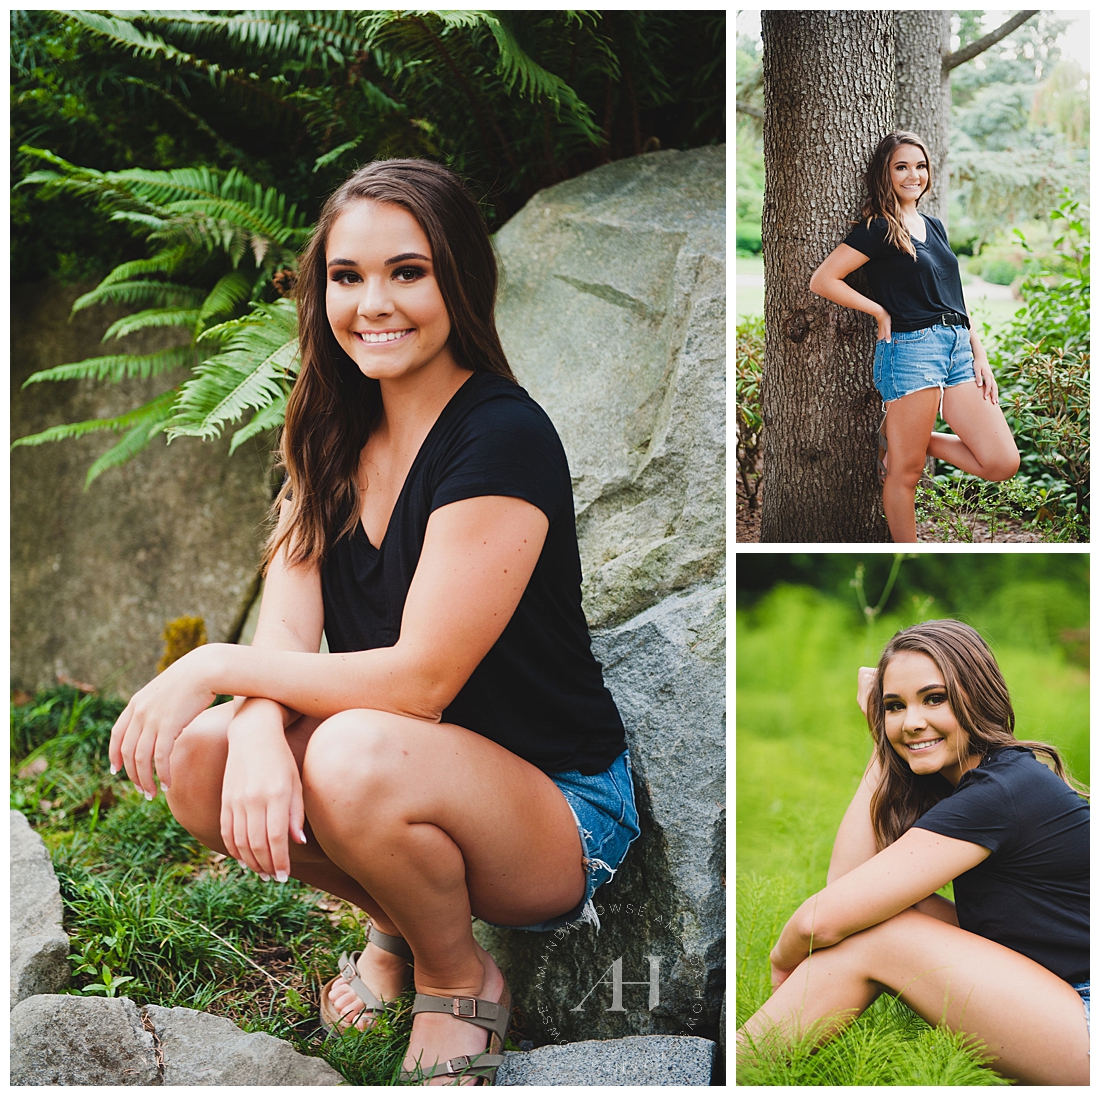 Senior Portraits with shorts and t-shirt in gorgeous garden photographed by Tacoma Senior Photographer Amanda Howse